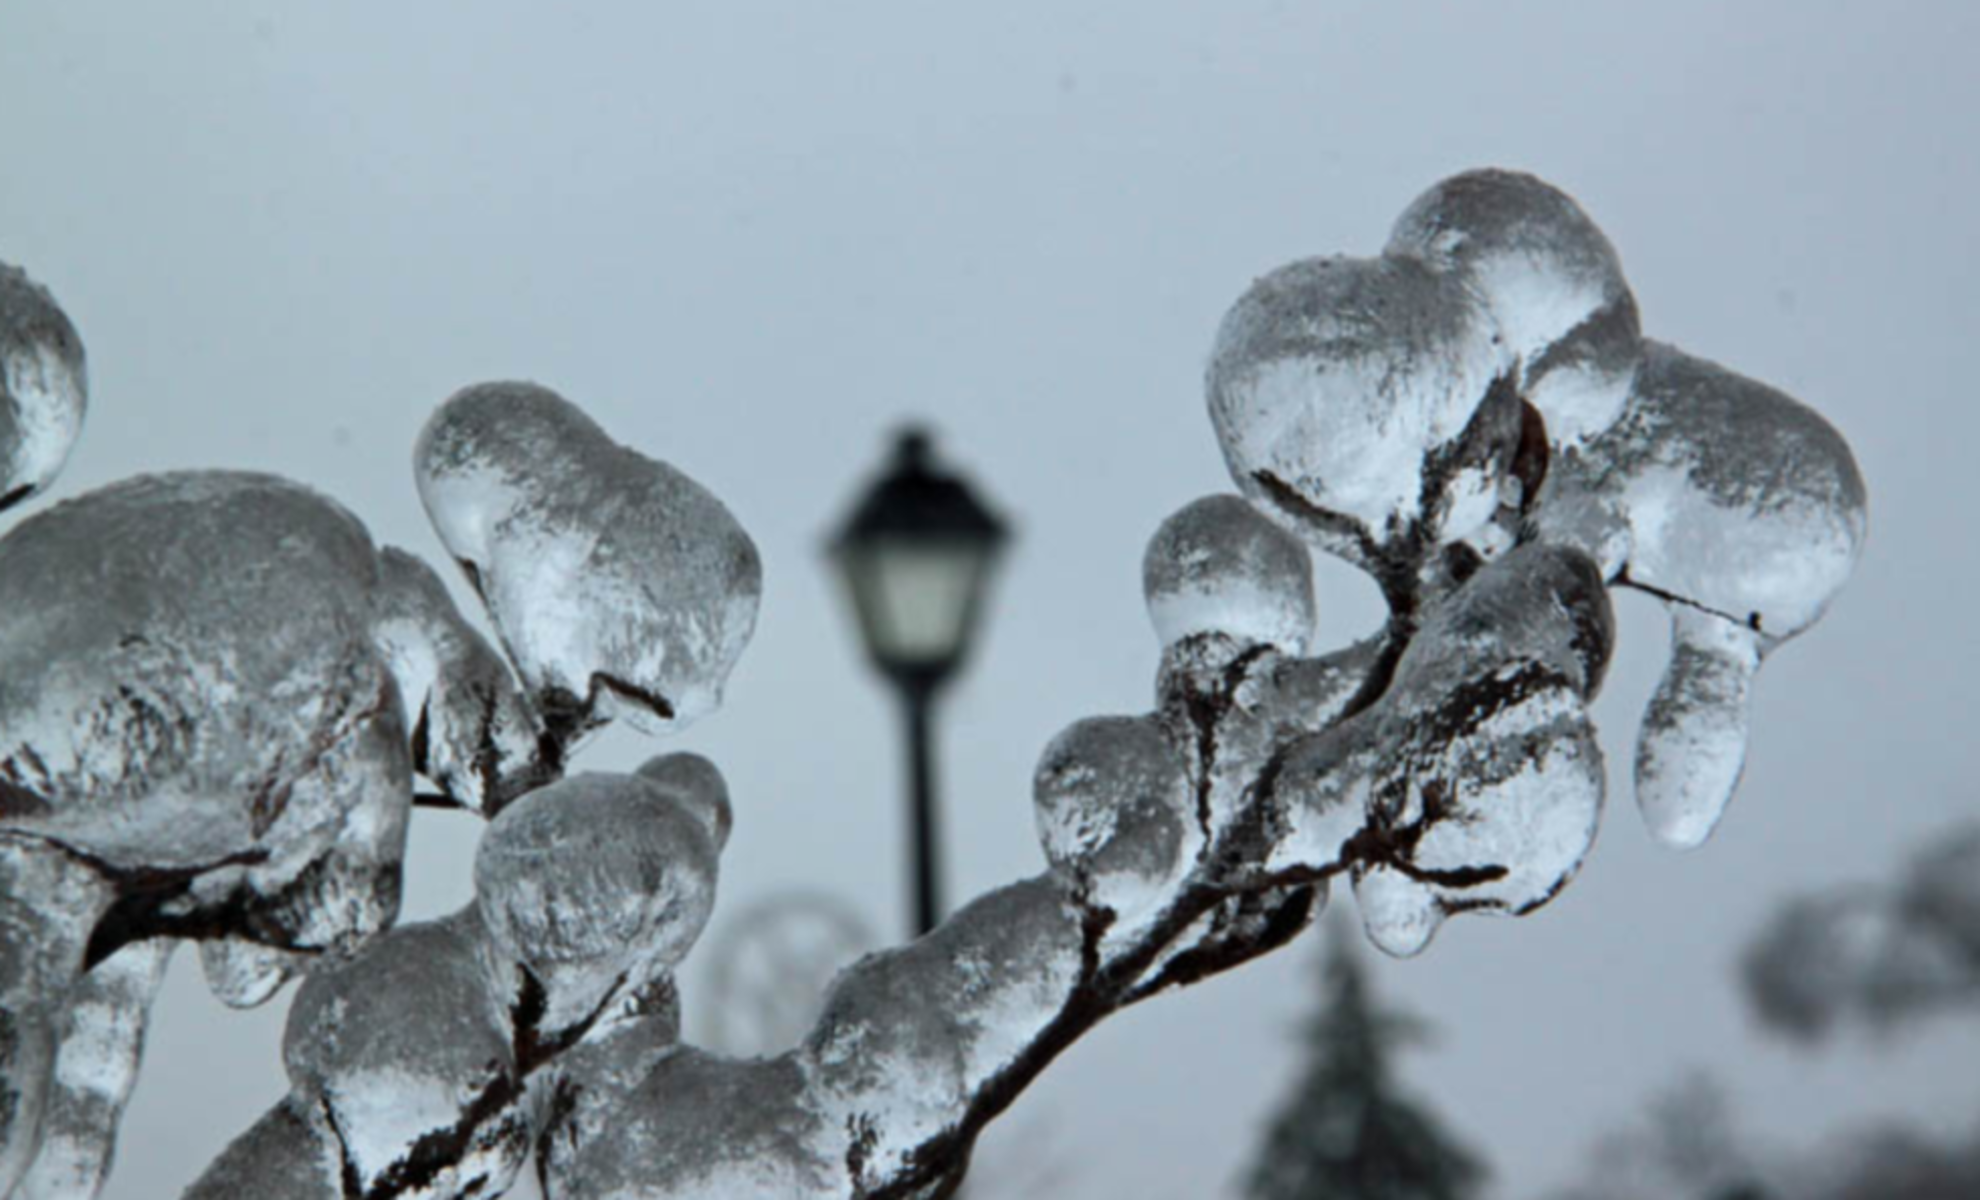 The ice storm of 2013 was a nightmare before, during & after Christmas